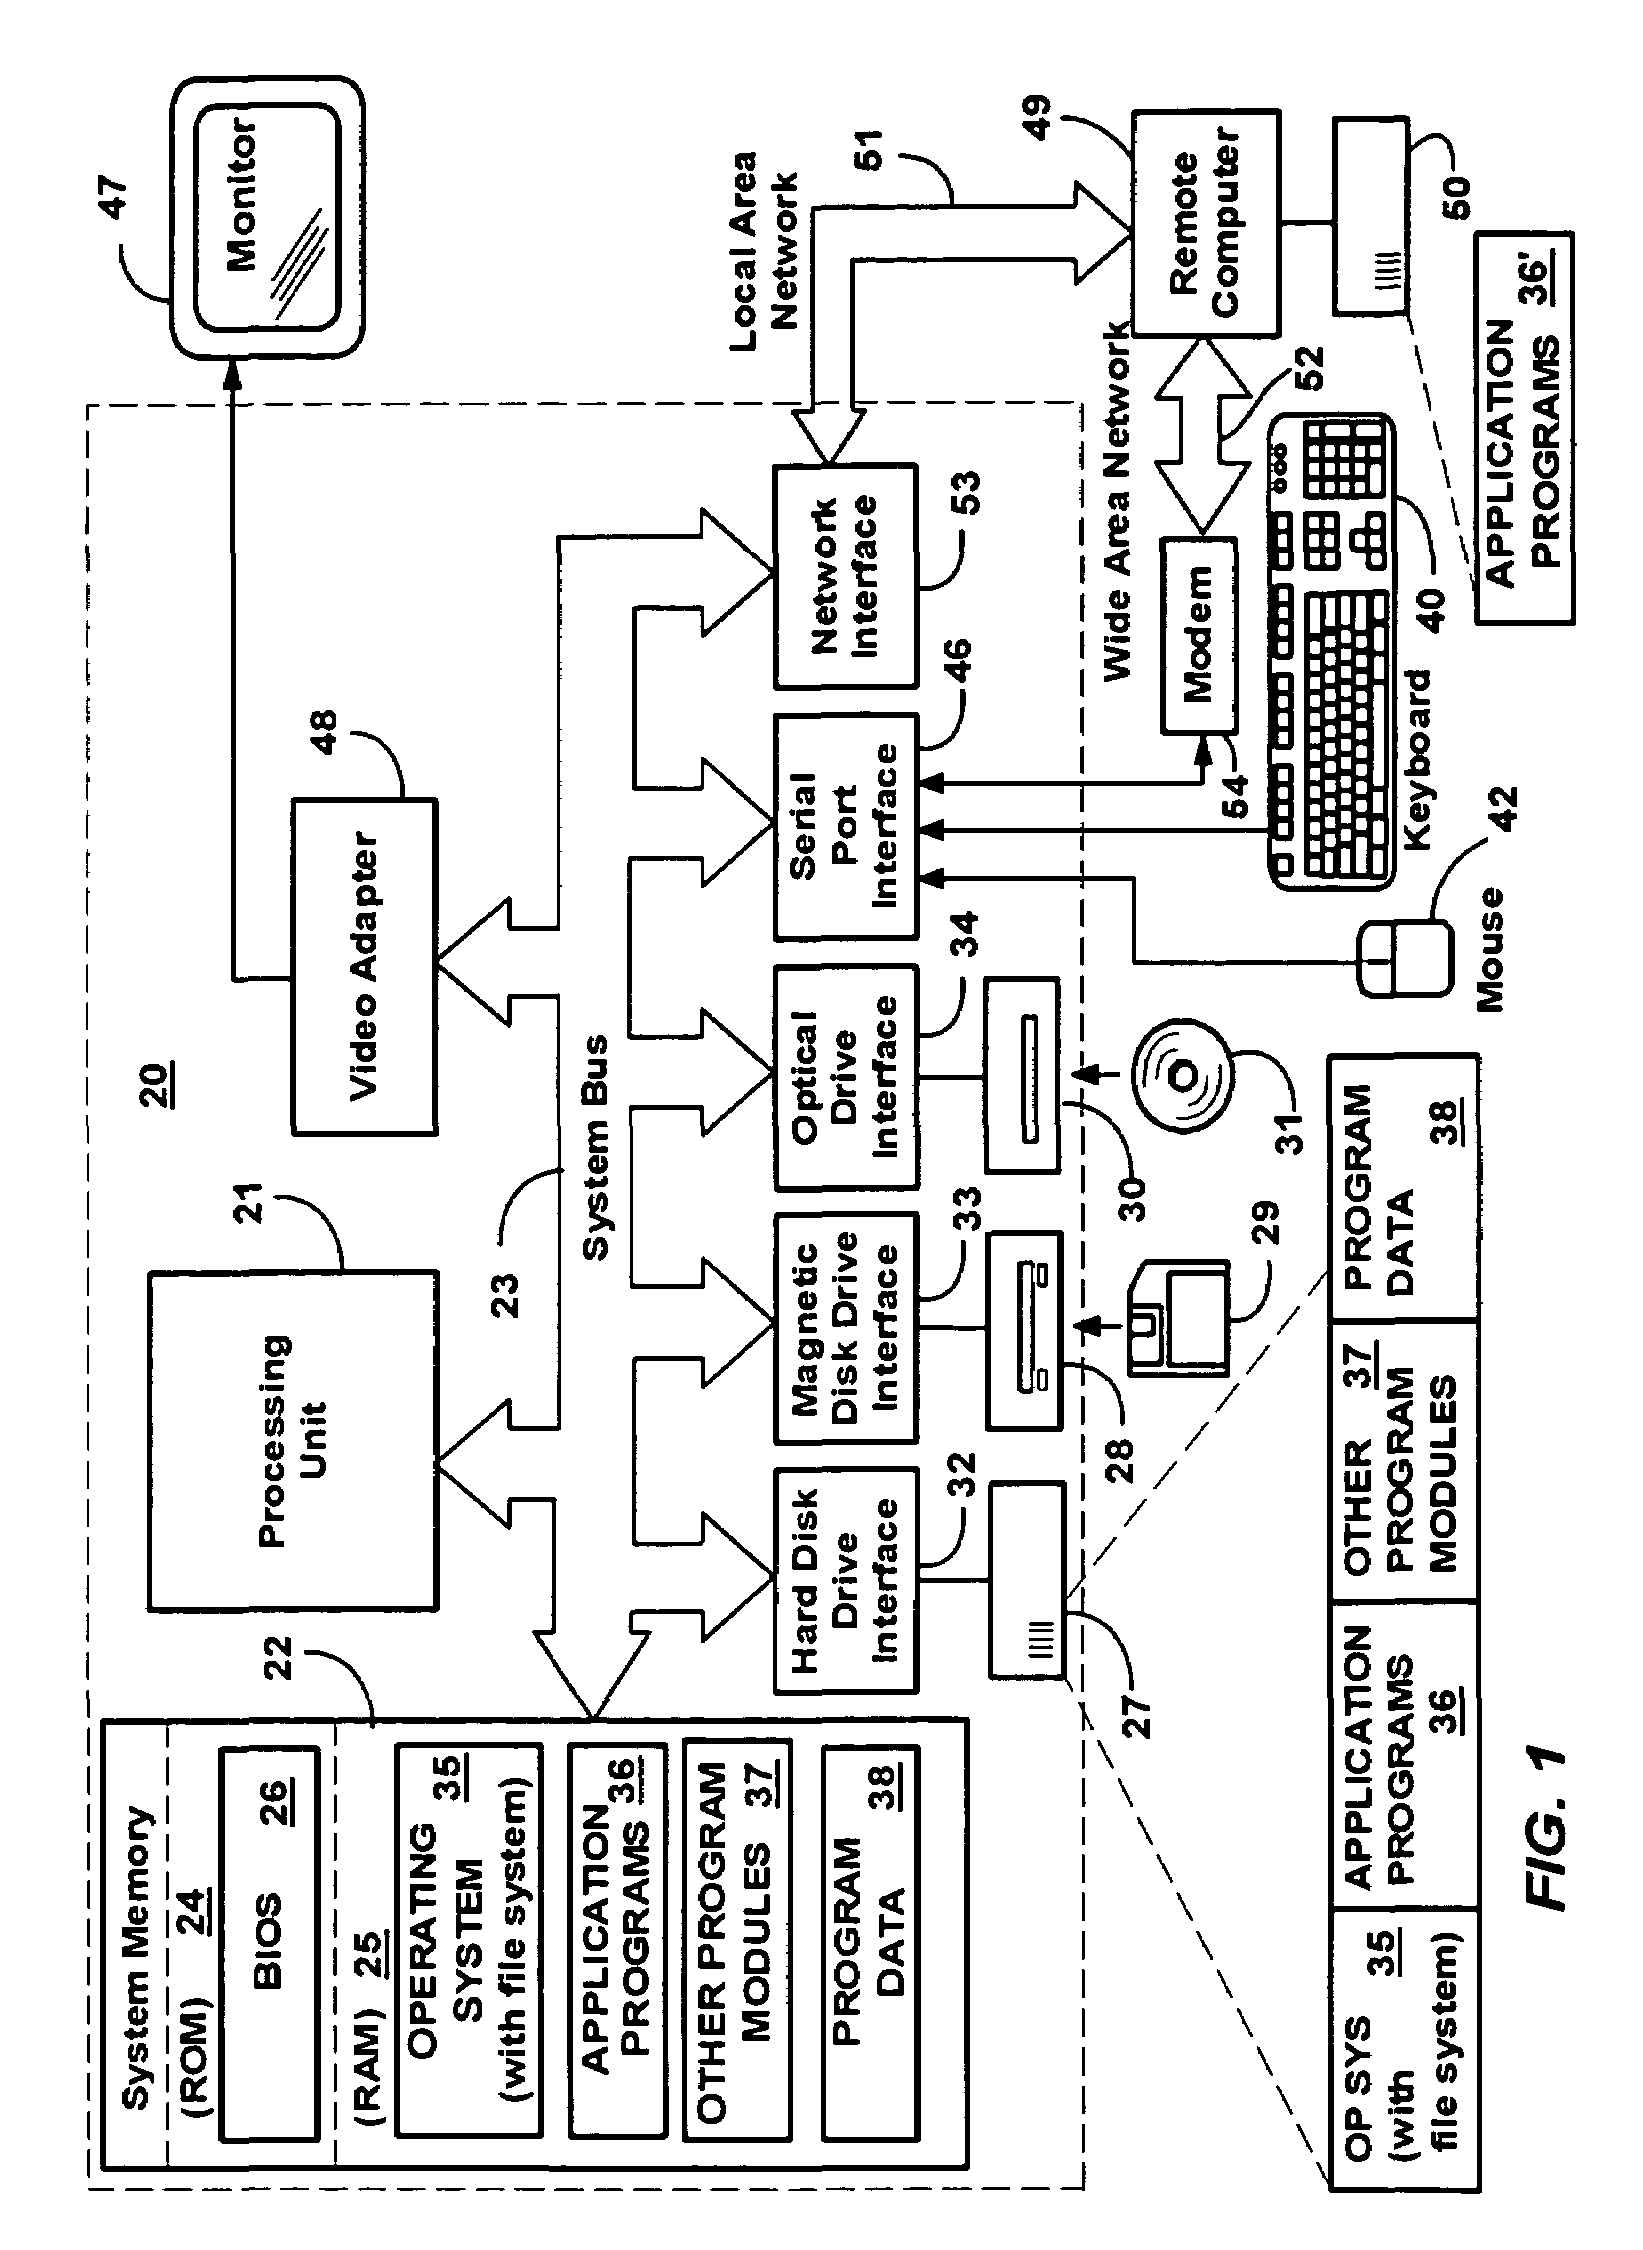 Method and system for accurately calculating latency variation on an end-to-end path in a network